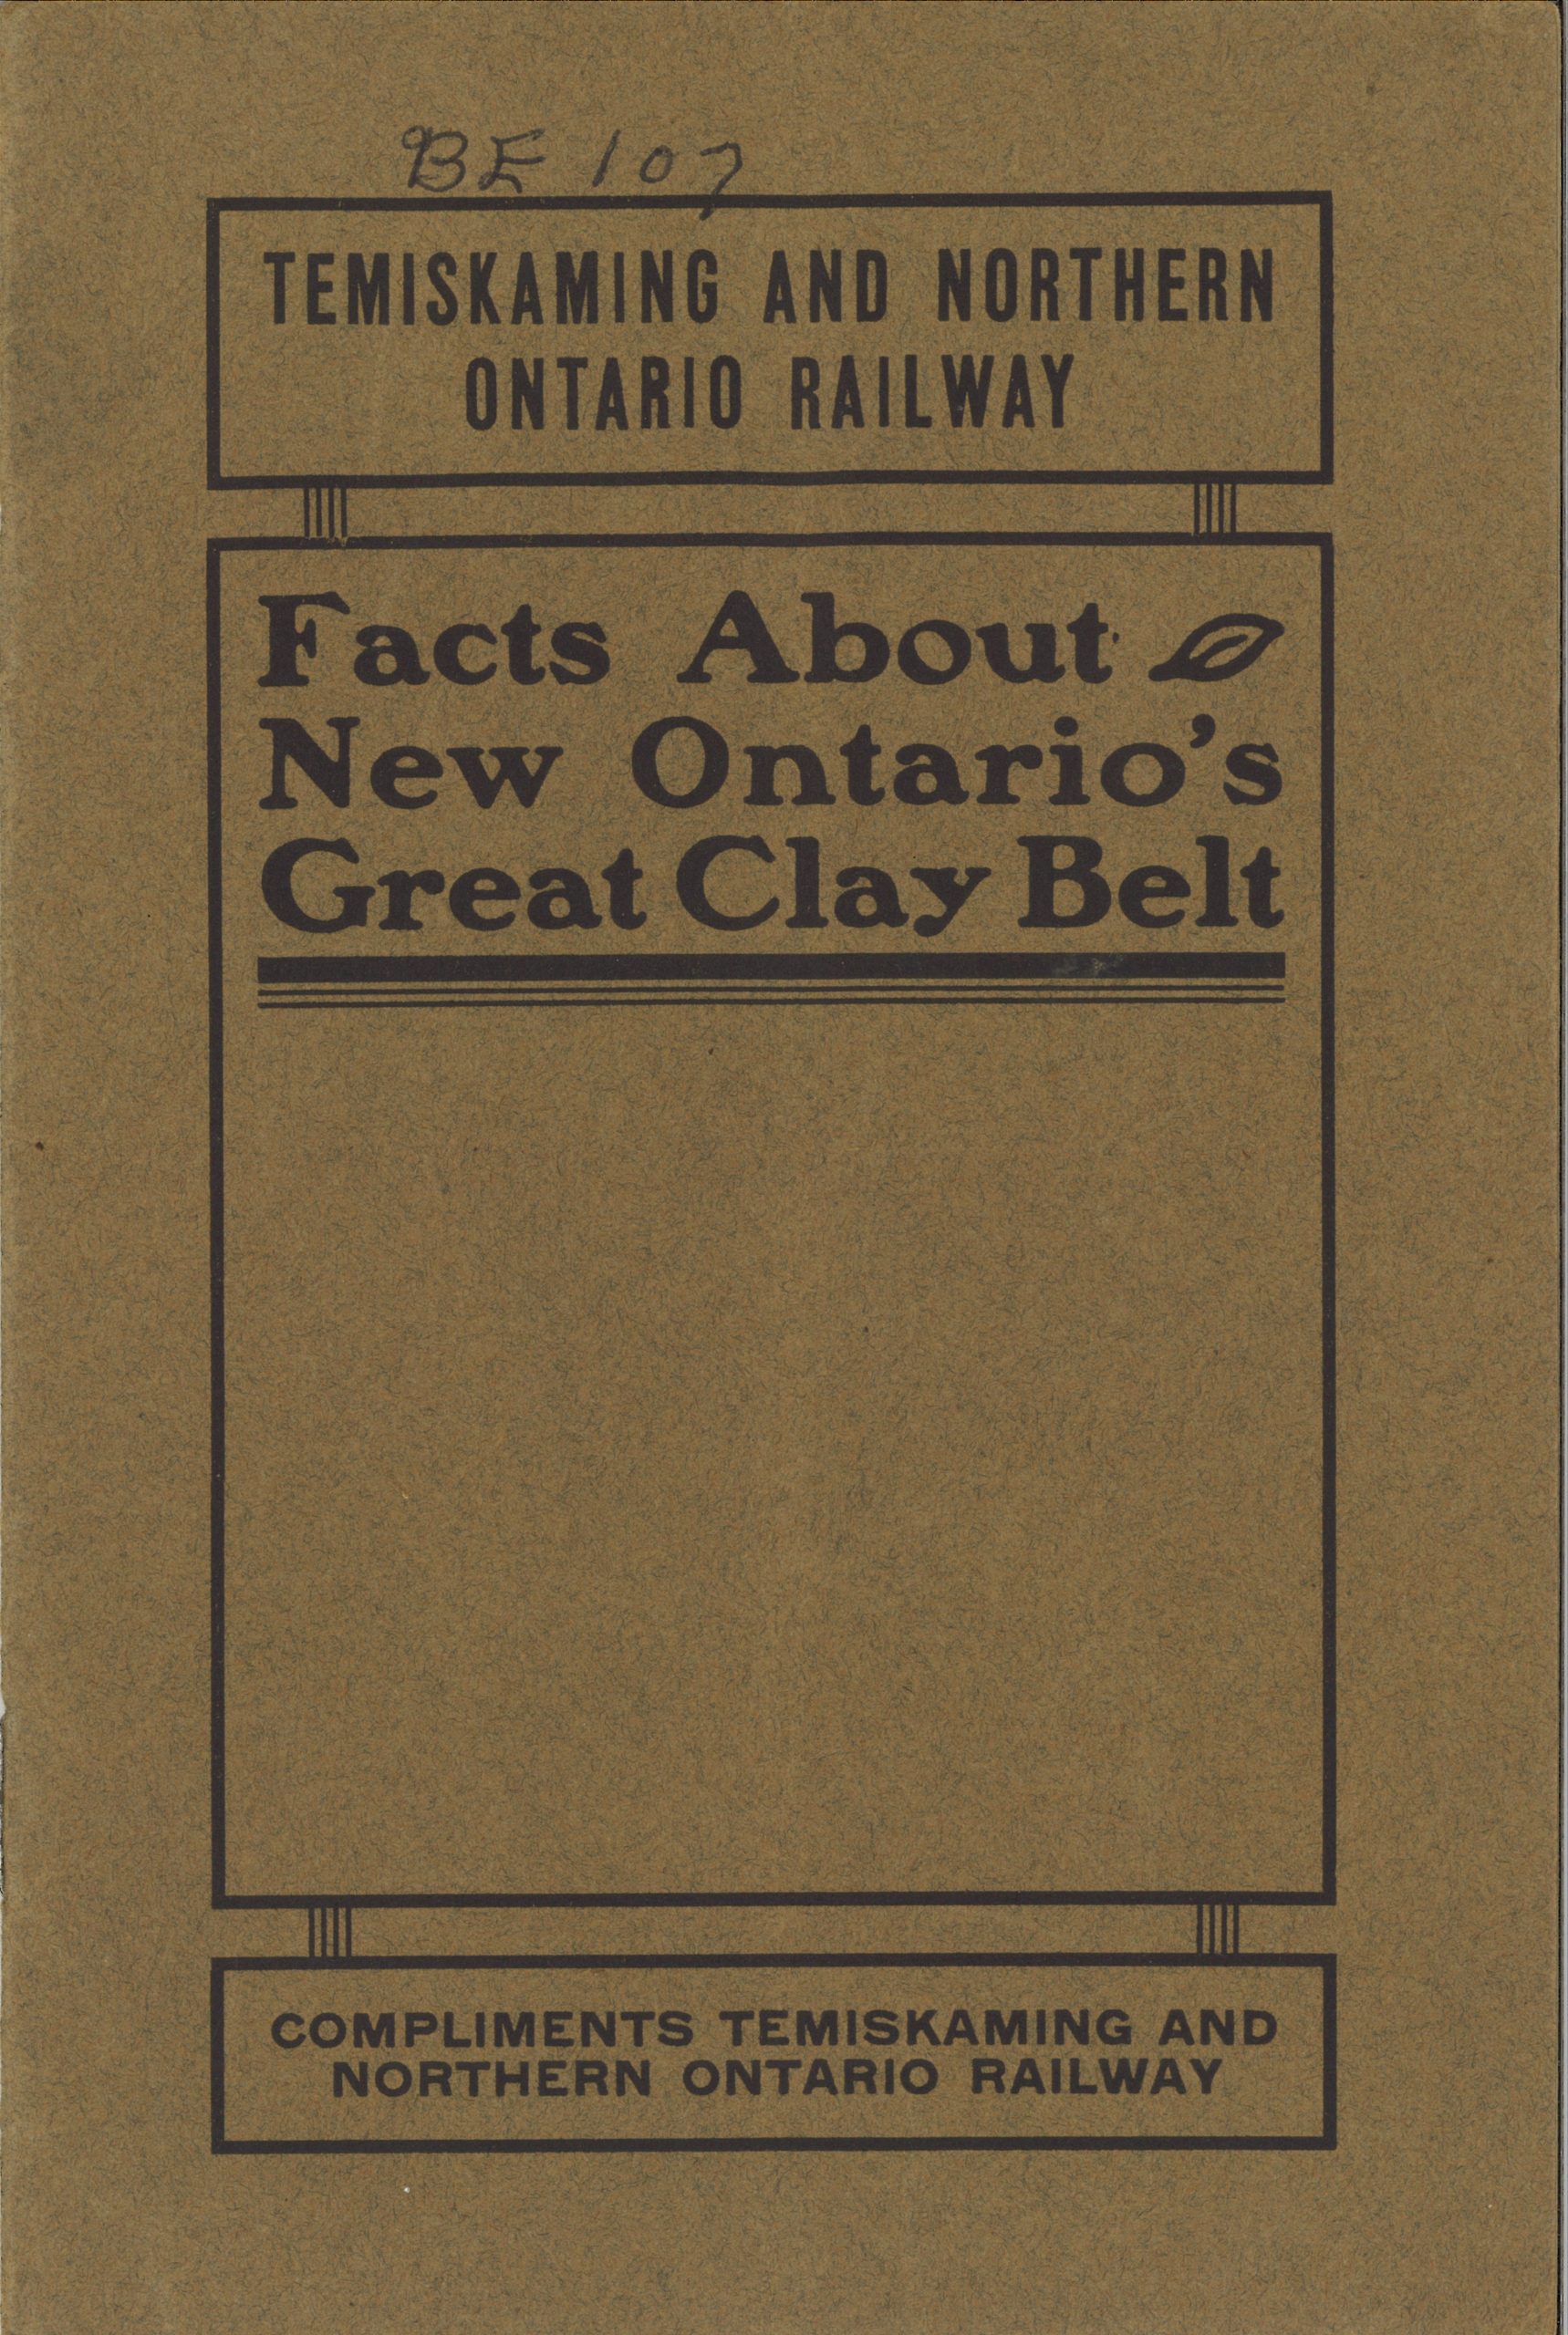 Cover of a brown coloured booklet with title and publisher in black lettering.